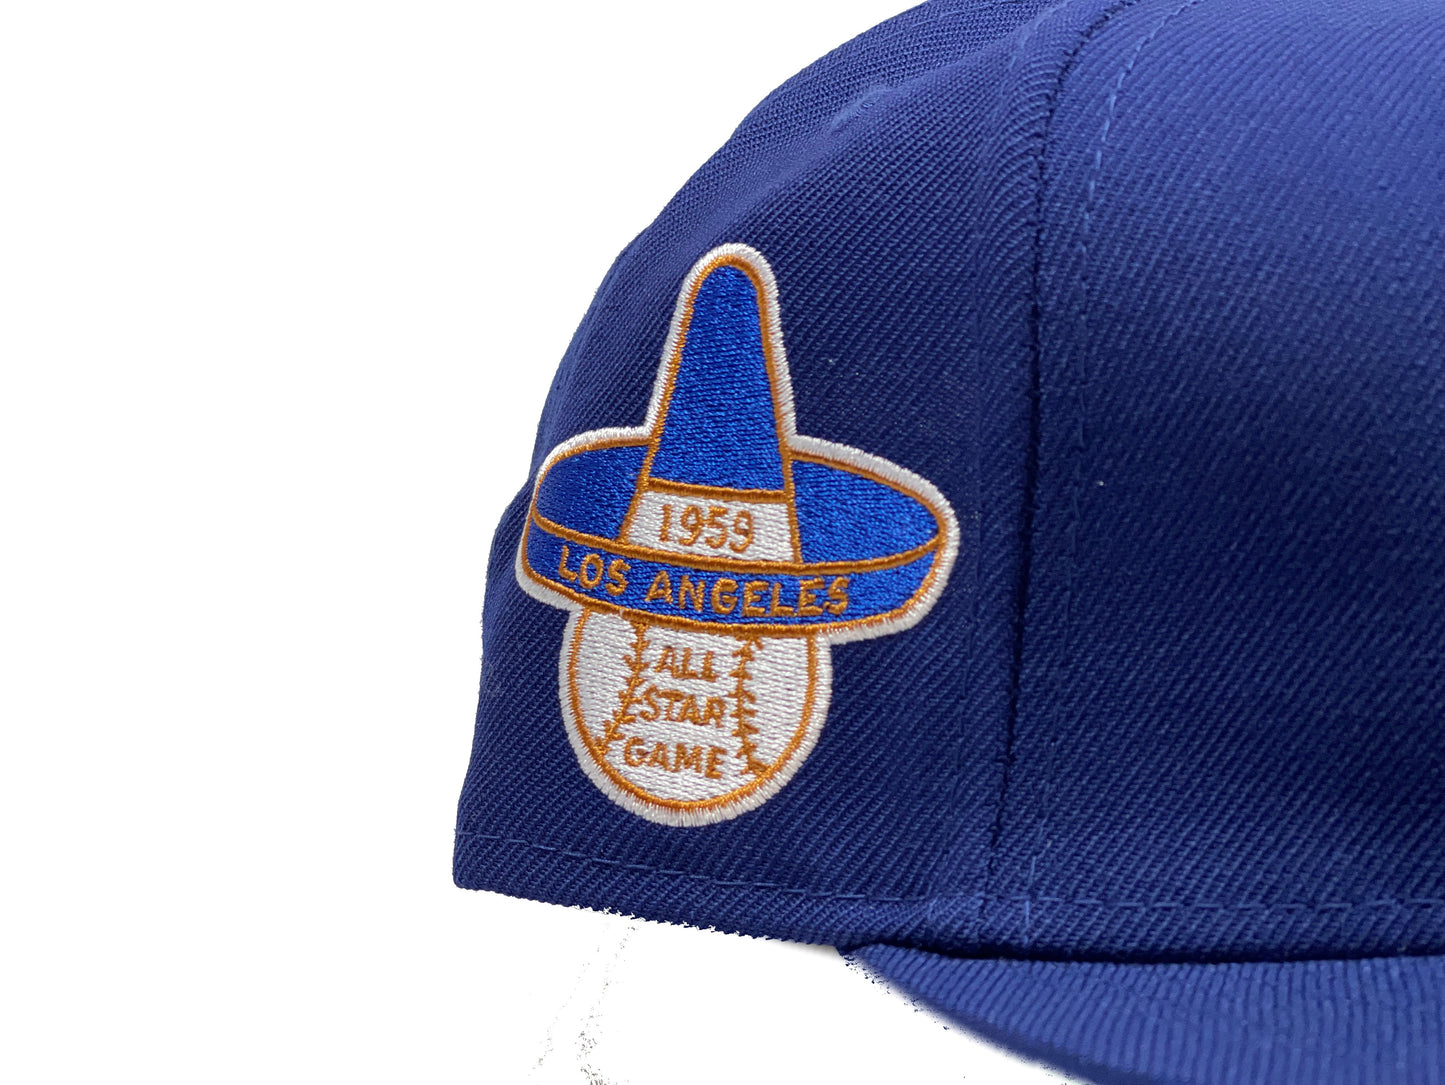 Los Angeles Dodgers All Star Game (Blue) Snapback